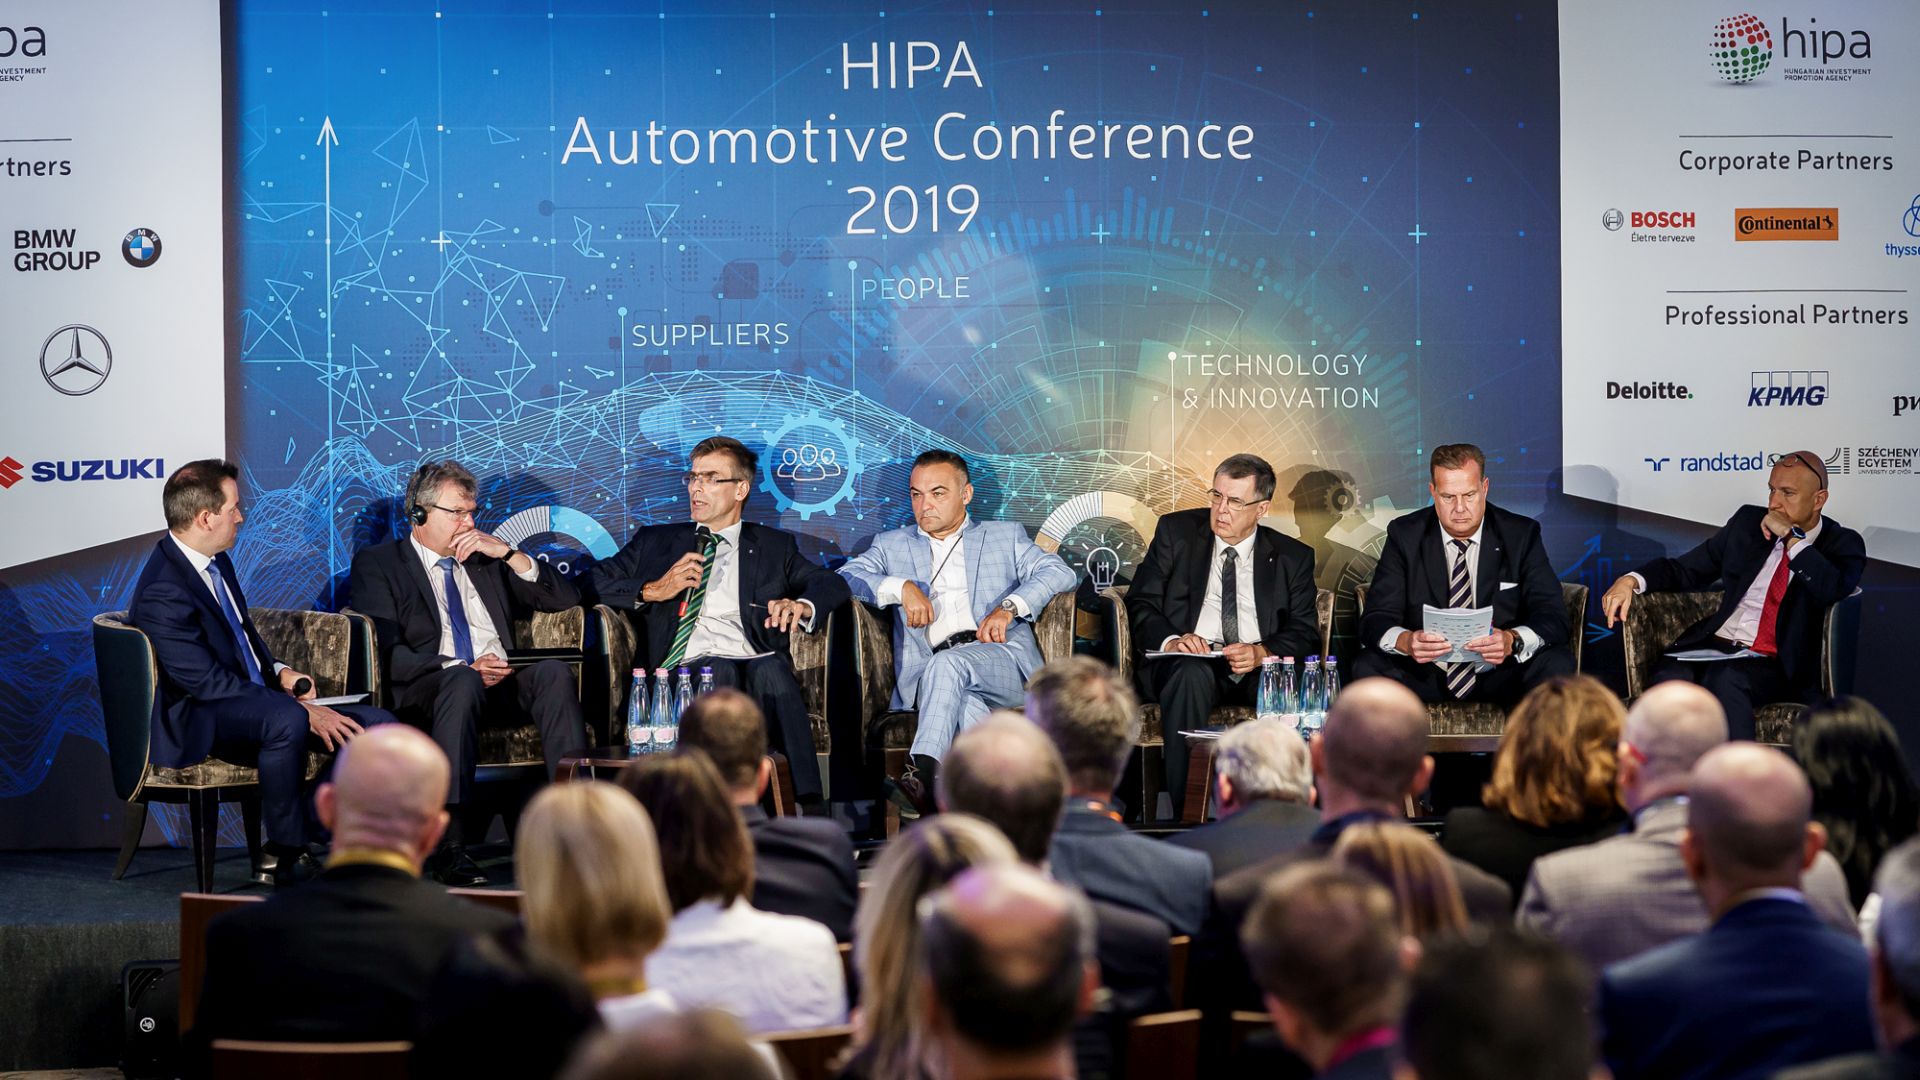 Róbert Ésik, President of HIPA, Achim Heinfling, Chairman of the Board of Management, Audi Hungaria; Michele Melchiorre, Senior Vice President Project Plant Hungary, BMW Group; Nevijo Mance, Director of Engineering, Jaguar Land Rover Hungary; Dr. László Urbán, Deputy Managing Director, Member of the Board, Magyar Suzuki Corporation; Christian Wolff, CEO, Mercedes-Benz Manufacturing Hungary; Grzegorz Buchal, Plant Manager, Opel Szentgotthárd